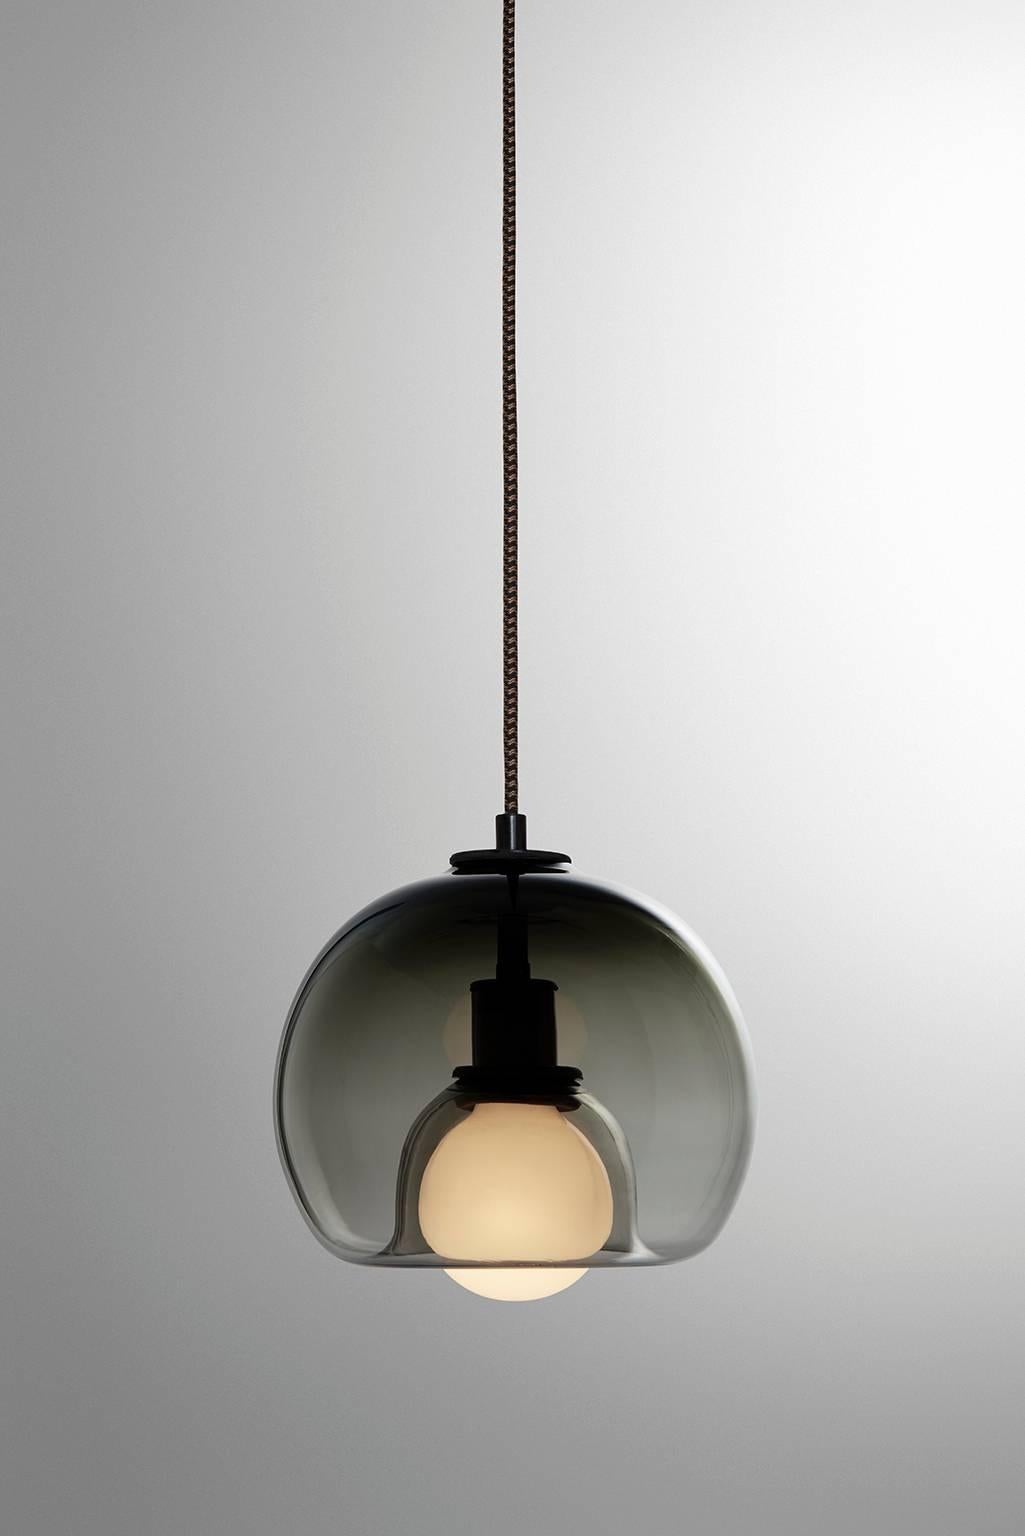 A handblown orb gracefully inverted to house a globe bulb, like a pearl encased in a glass oyster. The Eres Smoke has an 8” diameter with a 4' black and brown houndstooth fabric-covered cord and a 4.75” diameter black porcelain canopy. Houses one